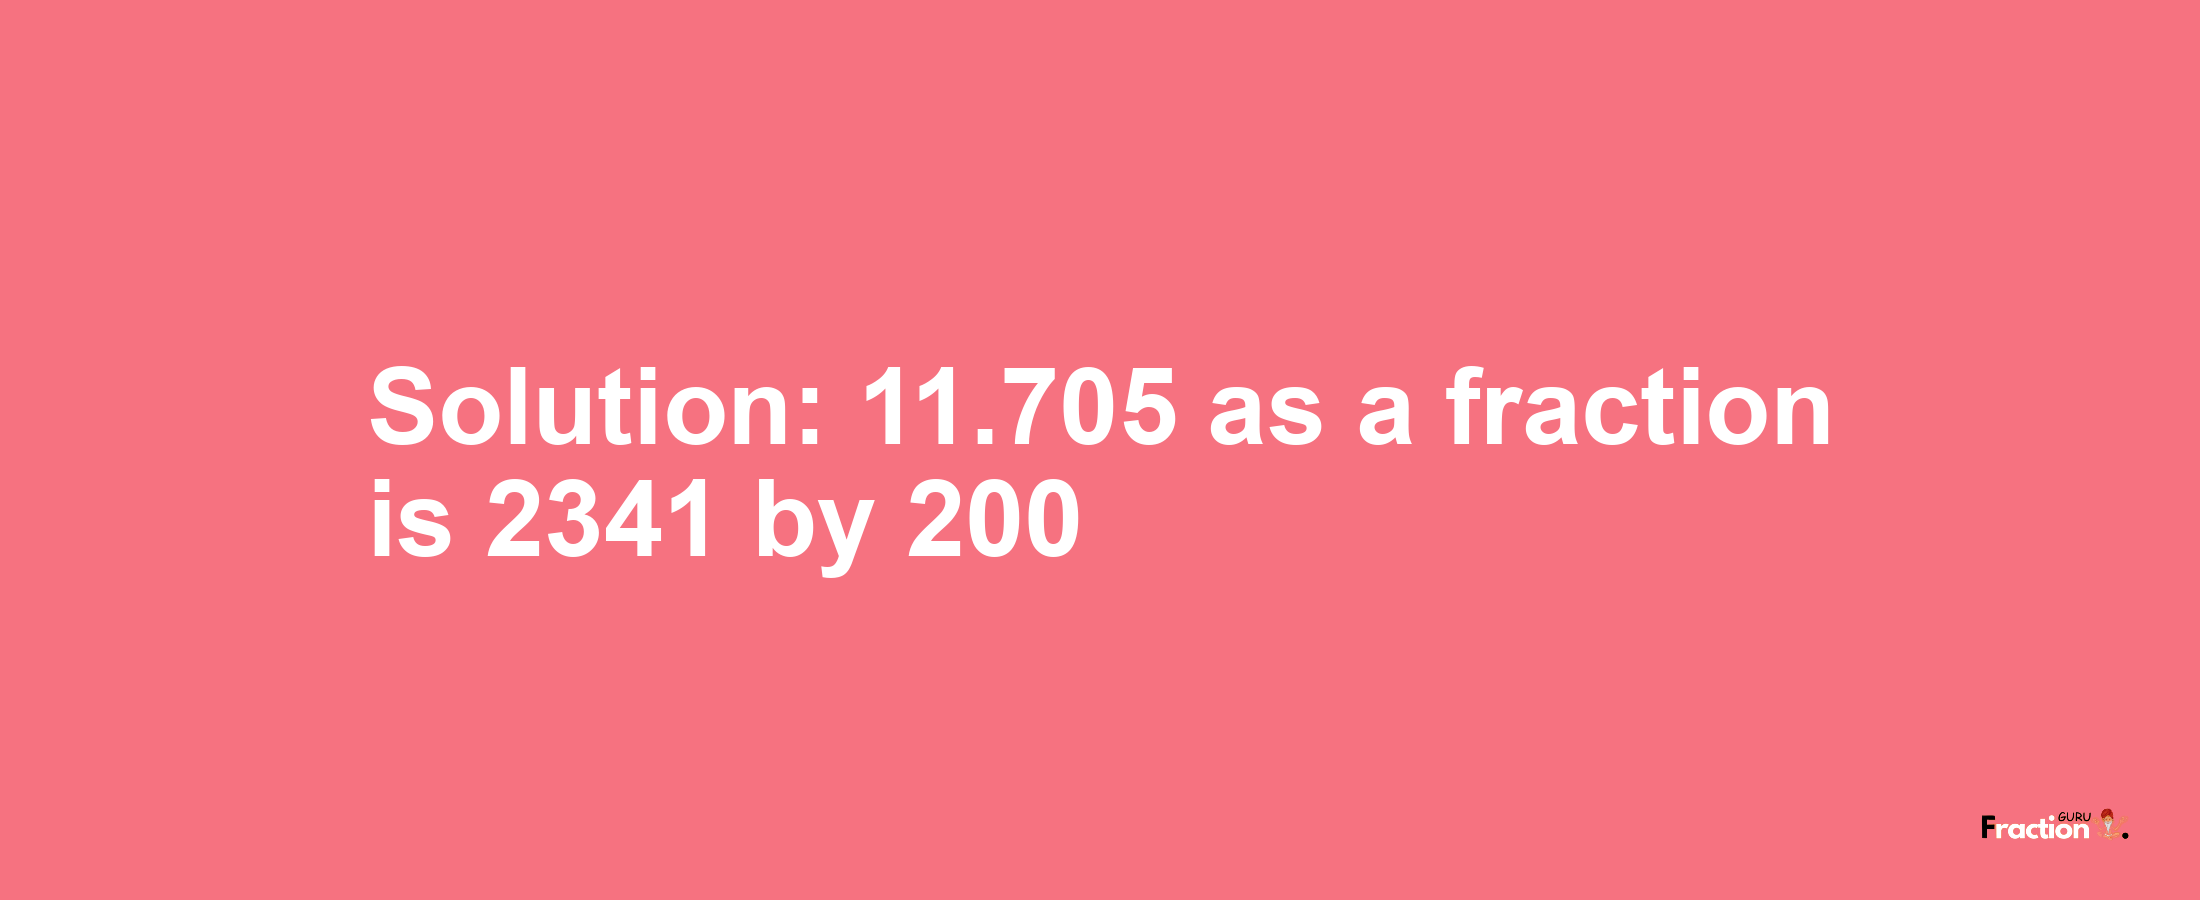 Solution:11.705 as a fraction is 2341/200